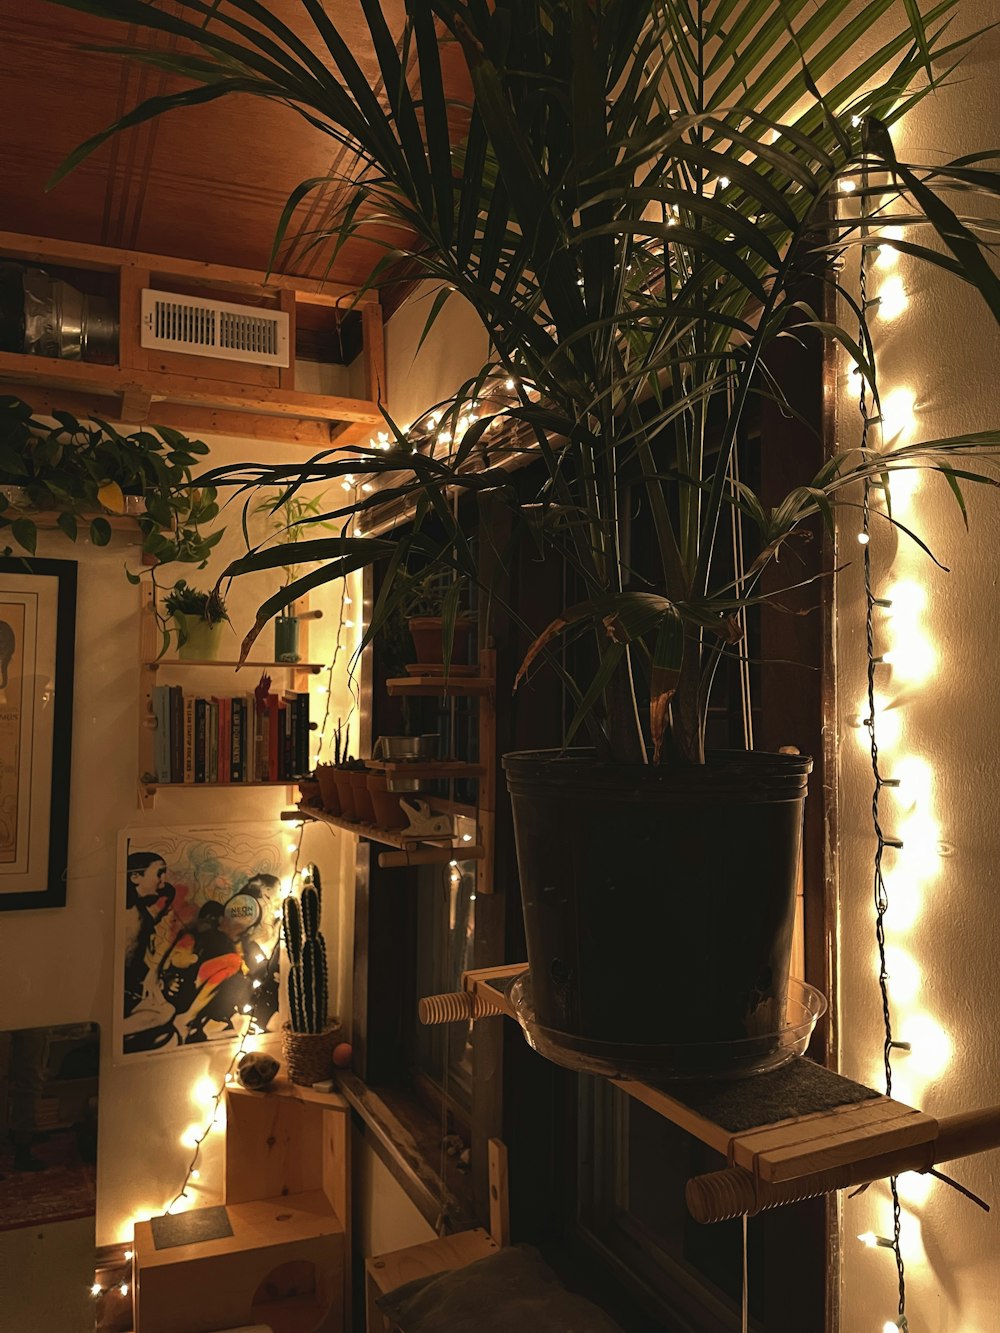 a potted plant sitting on top of a wooden shelf